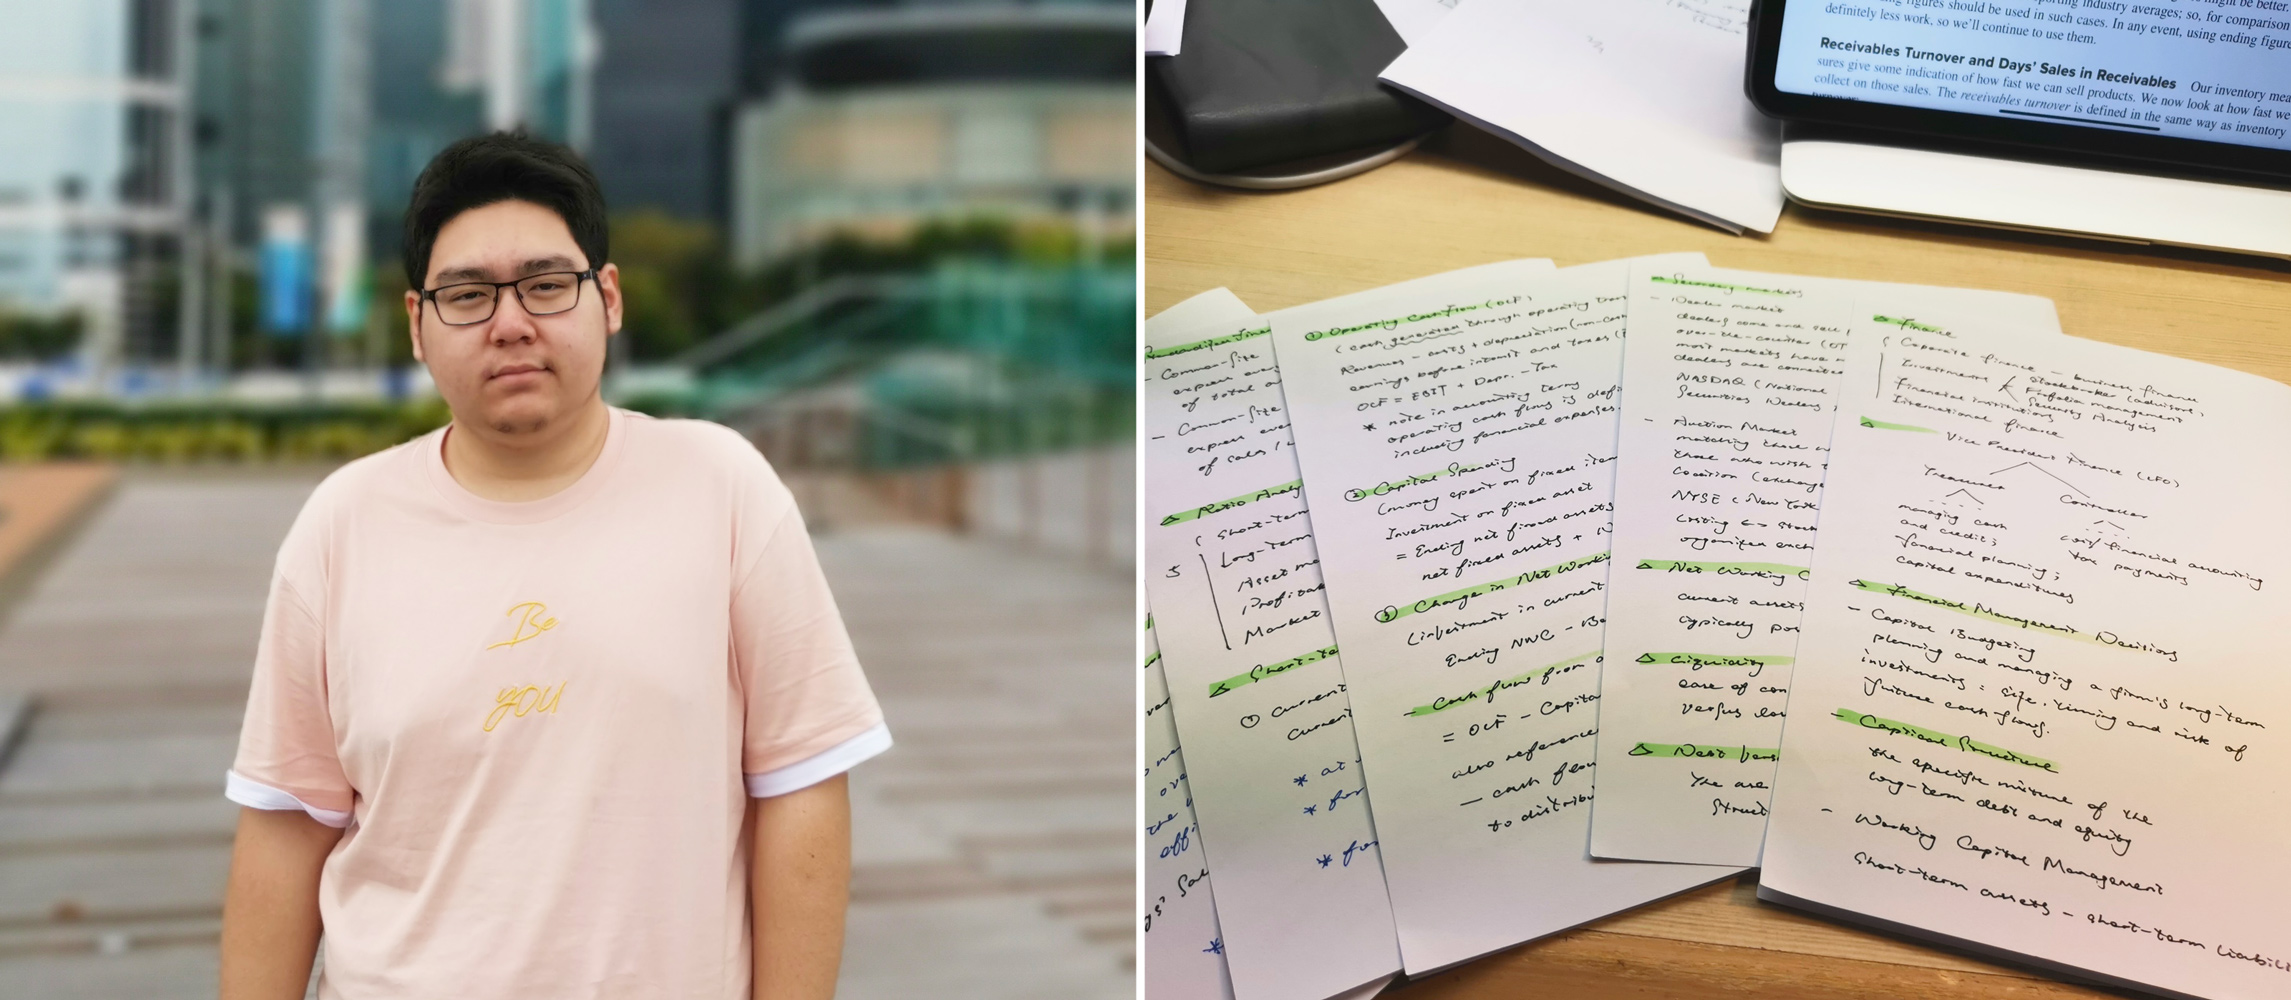 Wang Zifan is studying hard during the epidemic as a ‘thank you’ to his professors for their dedication.